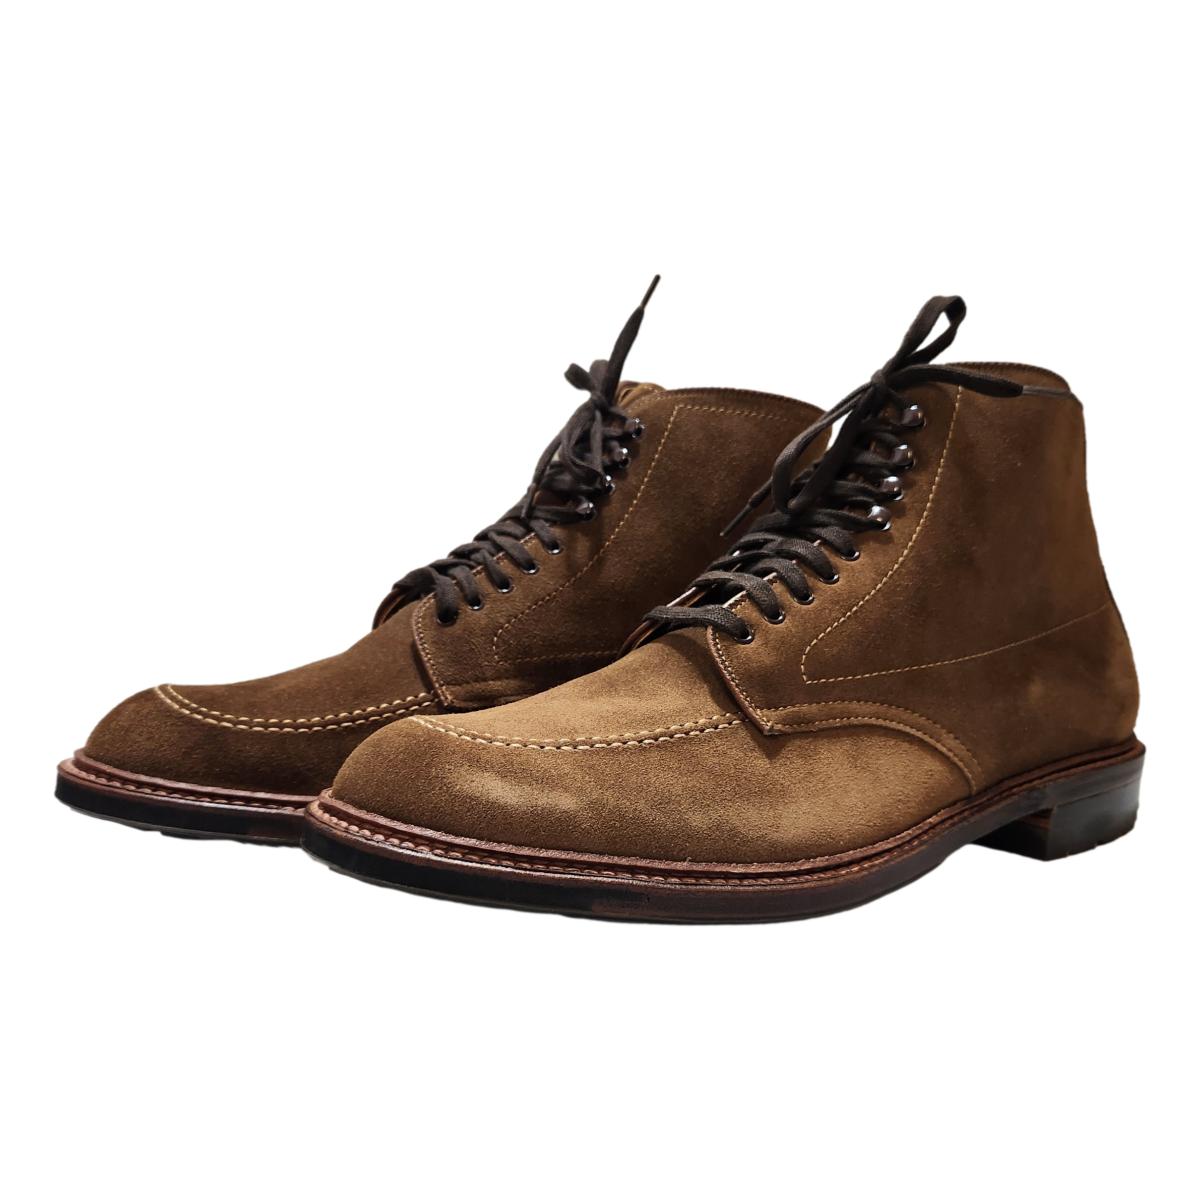 4011HC ’Indy’ Boot with Commando Sole - Snuff Suede